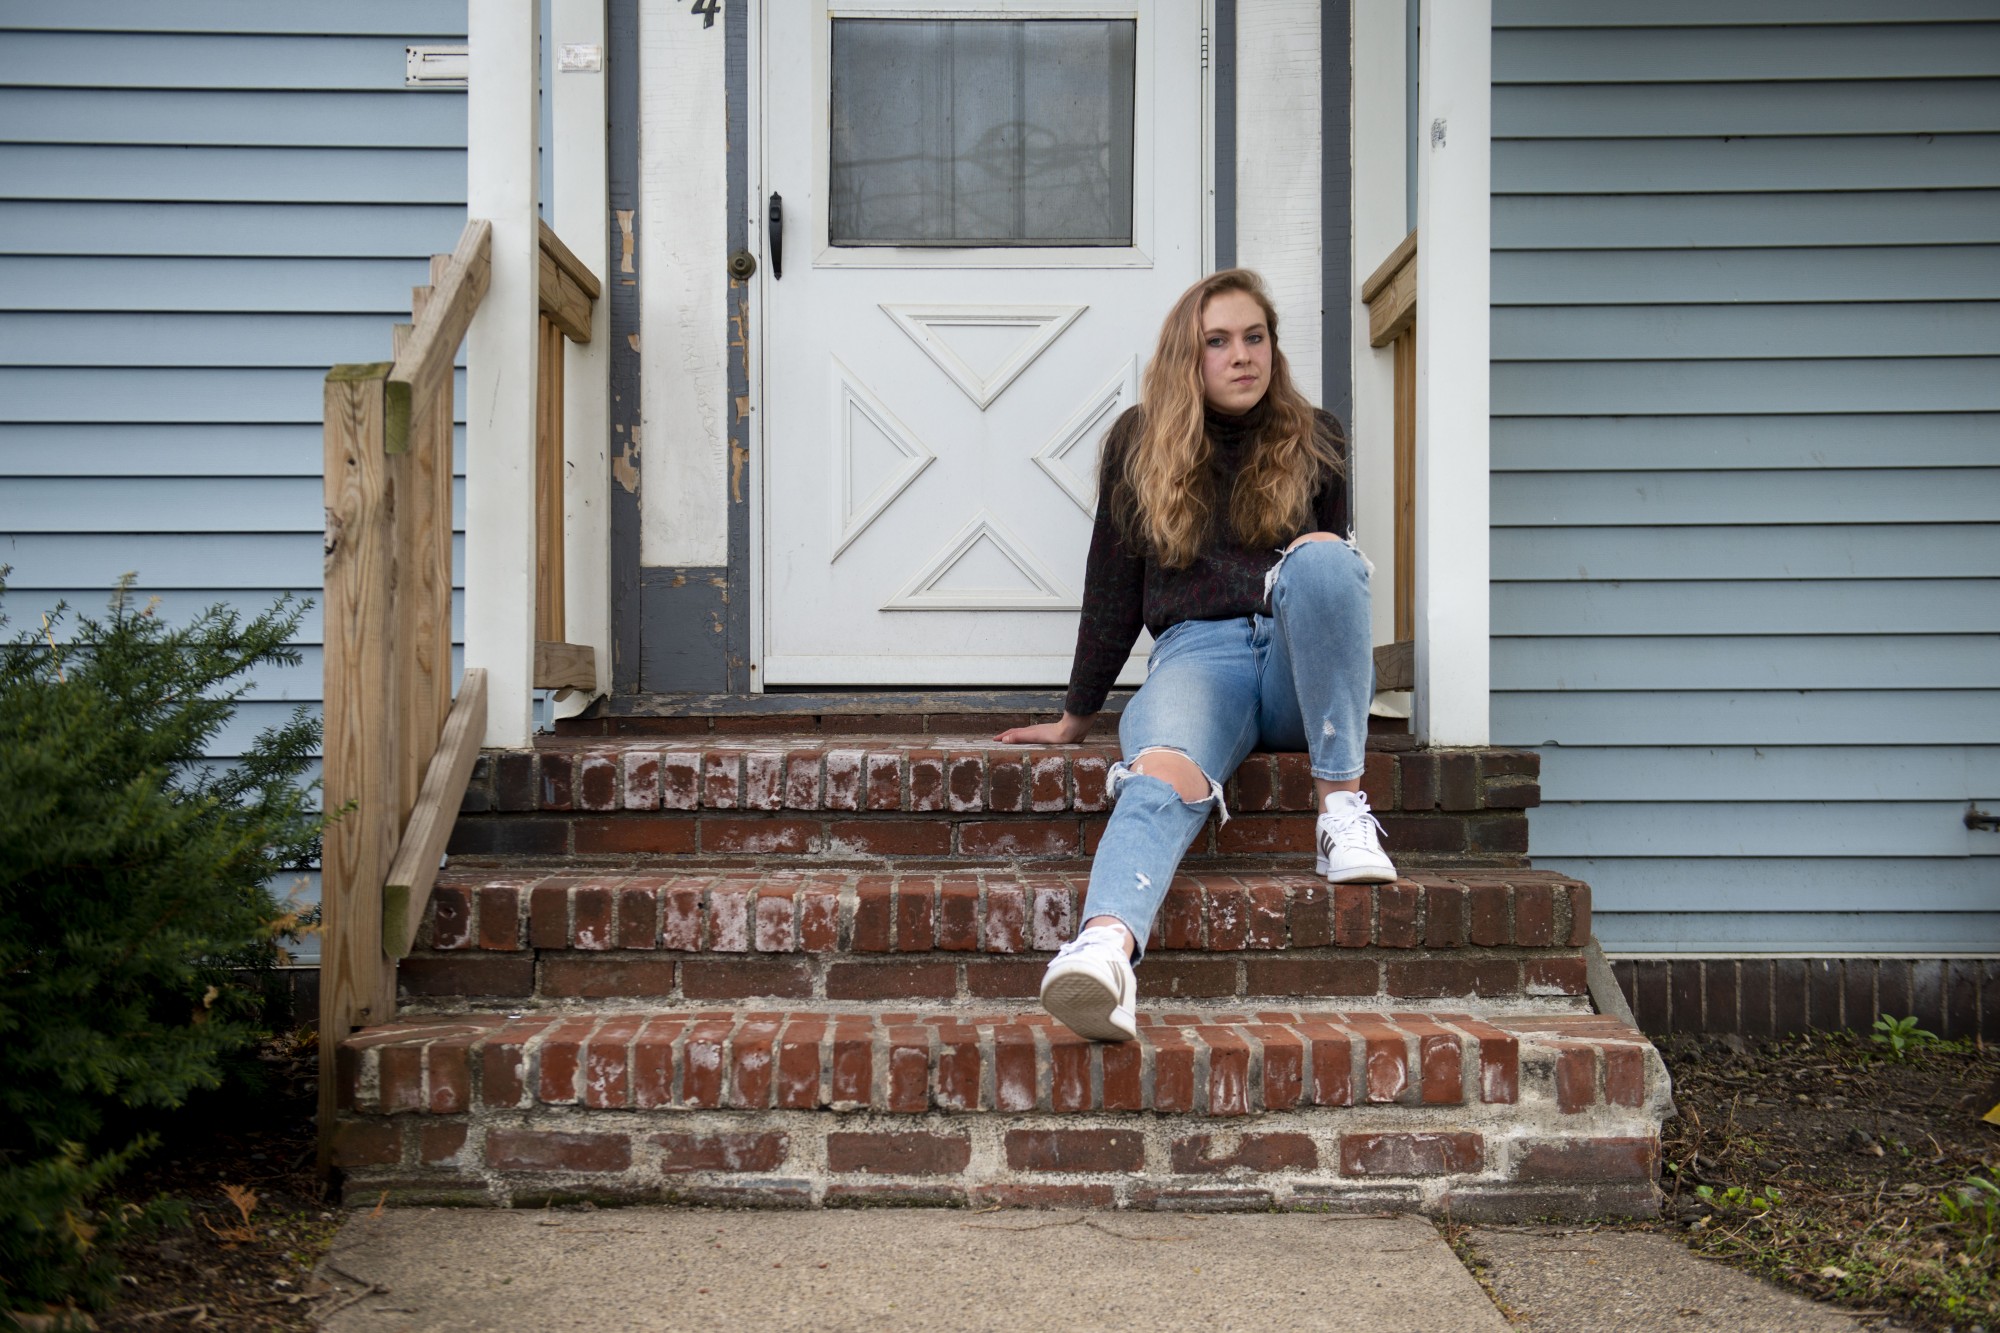 6:10 p.m.
Mary Clare OShea, who returned to campus to work after spending time at home once classes transitioned online, poses for a portrait on her front steps. Currently living with only one other person, The big thing for me has been realizing how important human connection is, she said. 